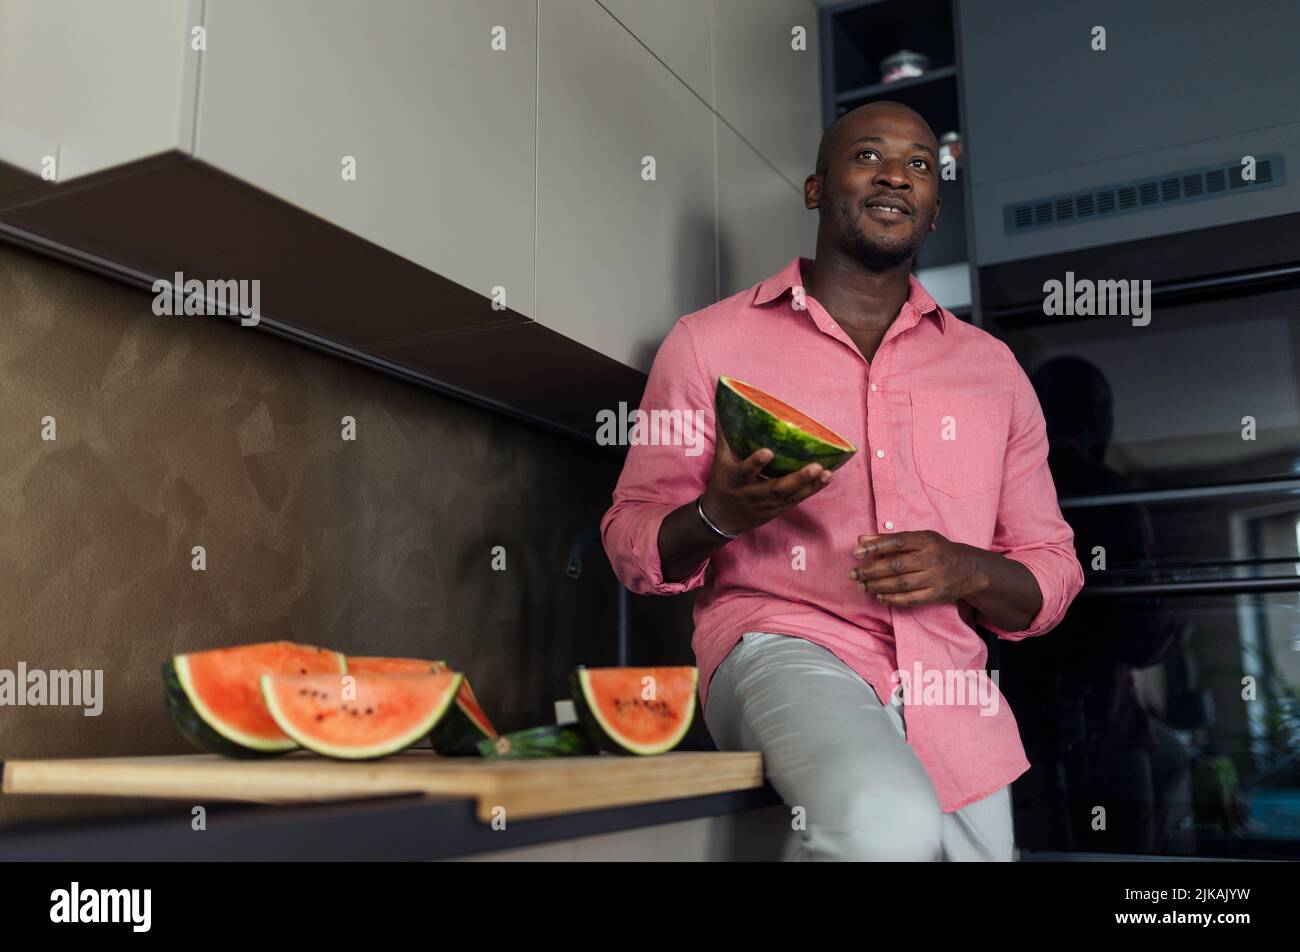 Multiracial man eating watermelon in his kitchen during hot sunny days. Stock Photo